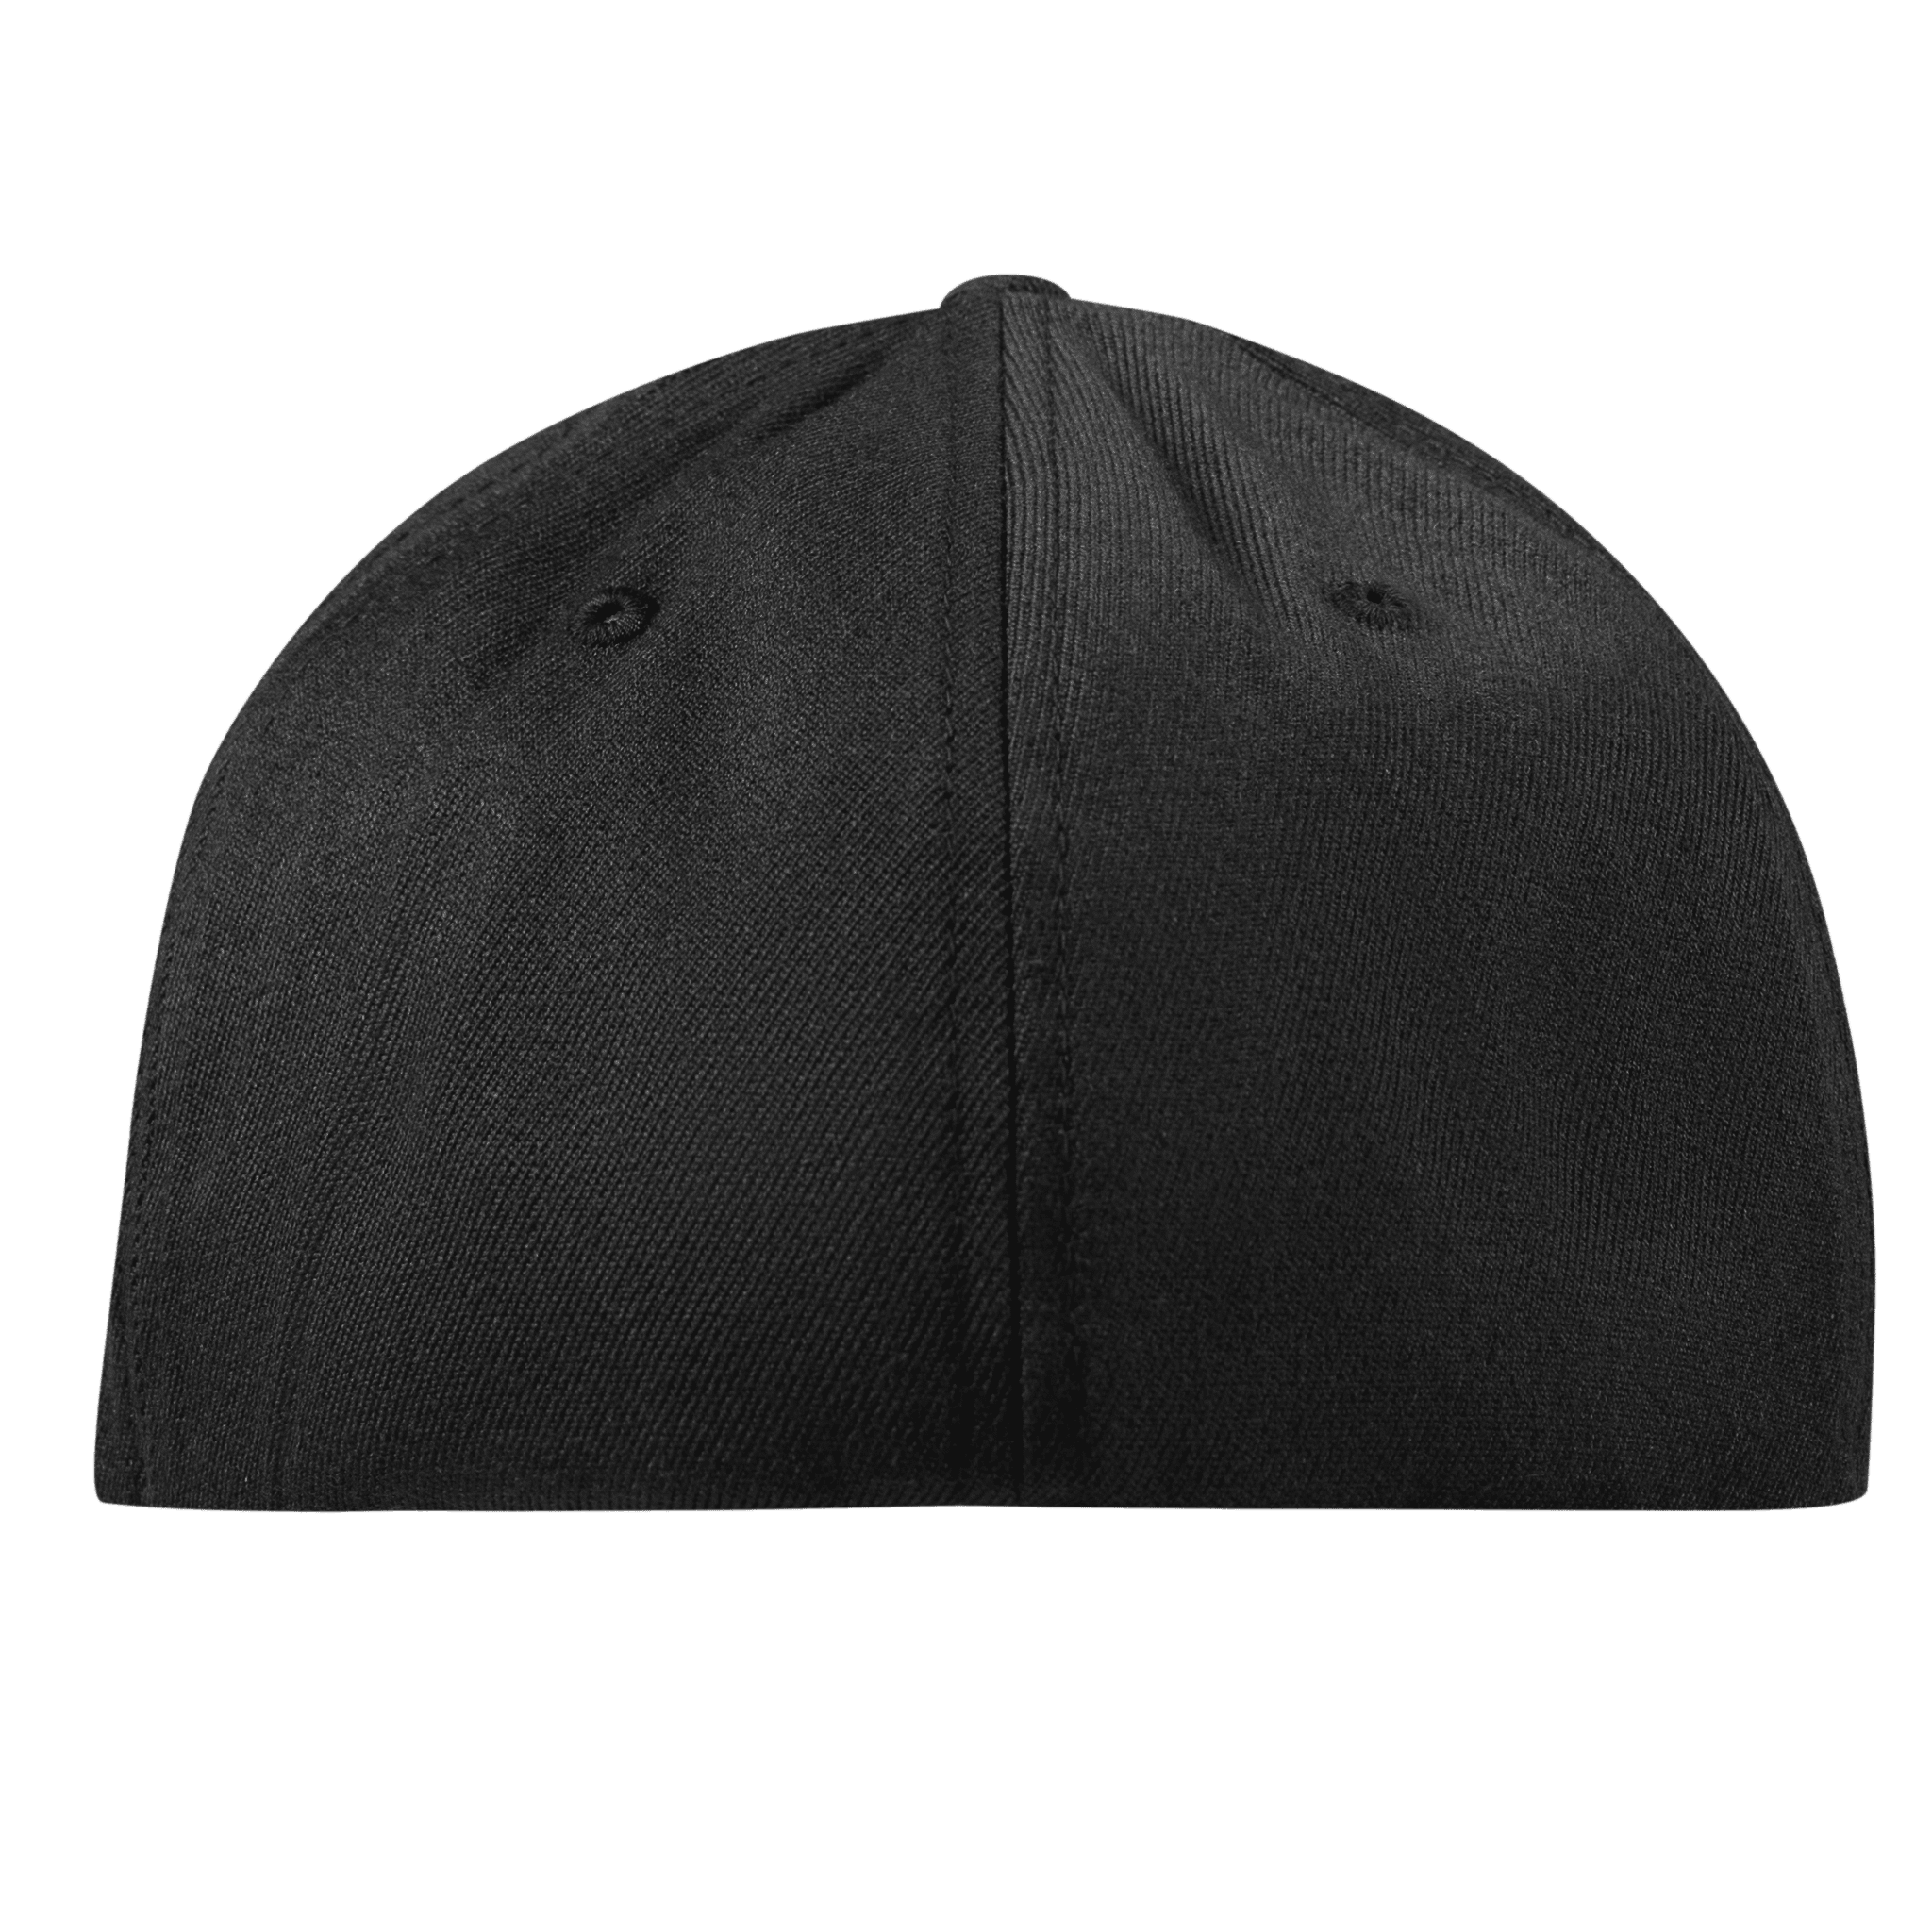 New Mexico Compass Flexfit Fitted Back Black